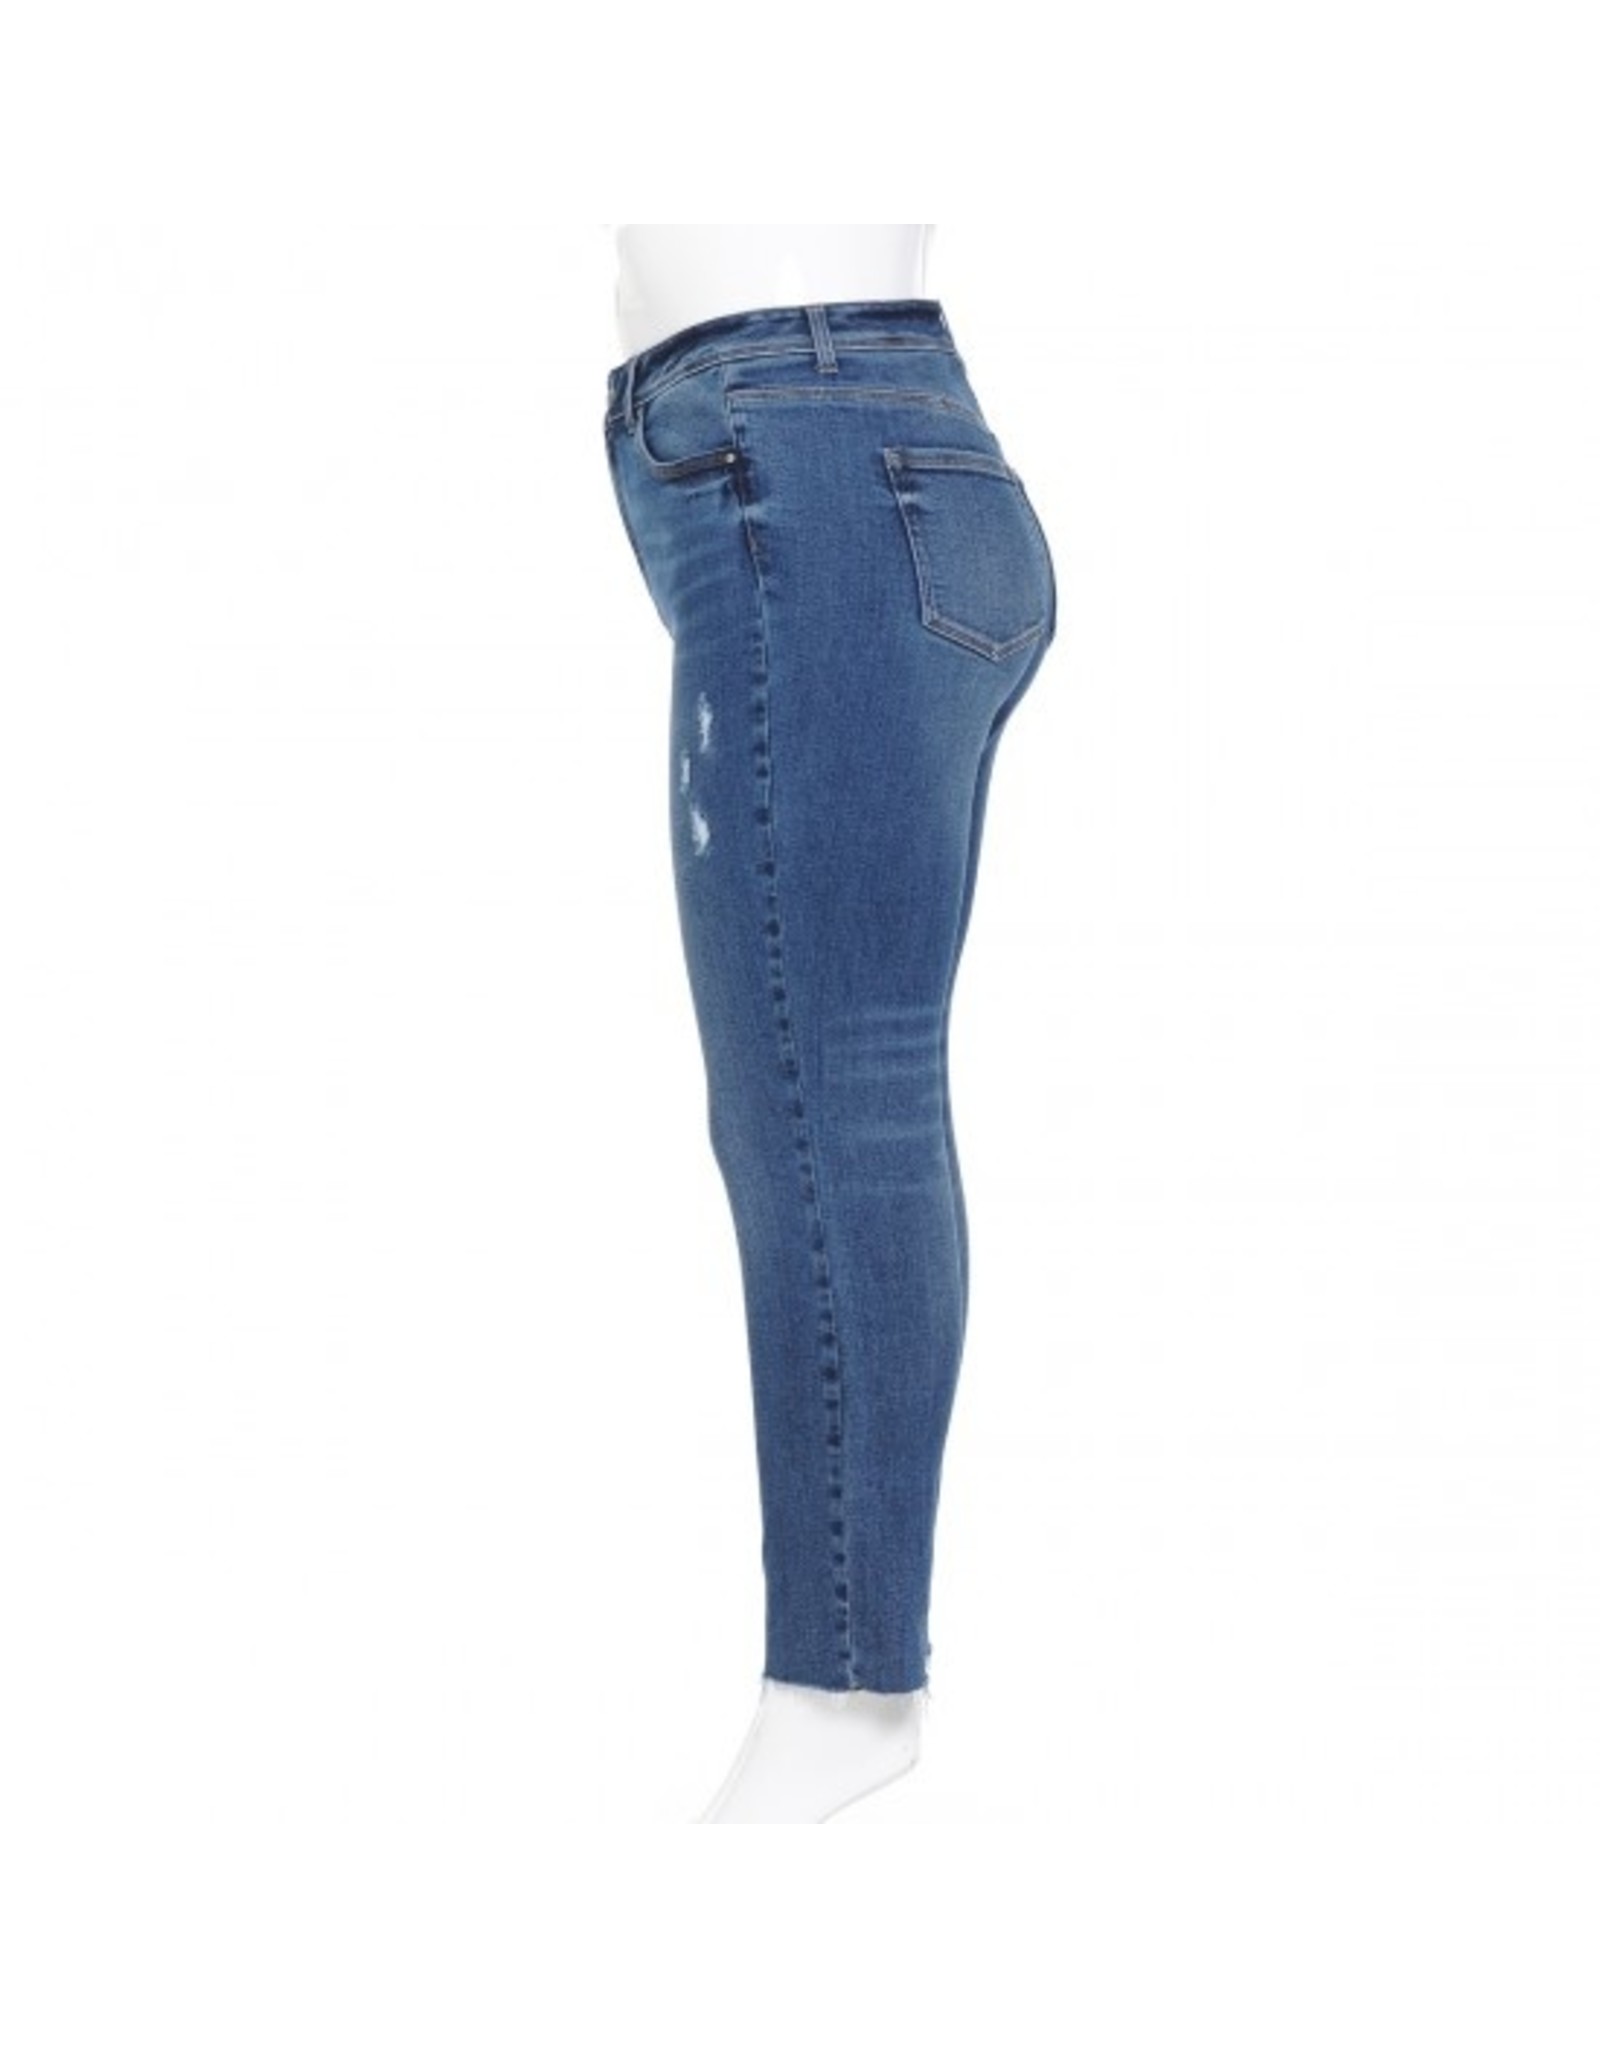 WAX JEANS - Womens High Rise Skinny Jeans - 90185XL